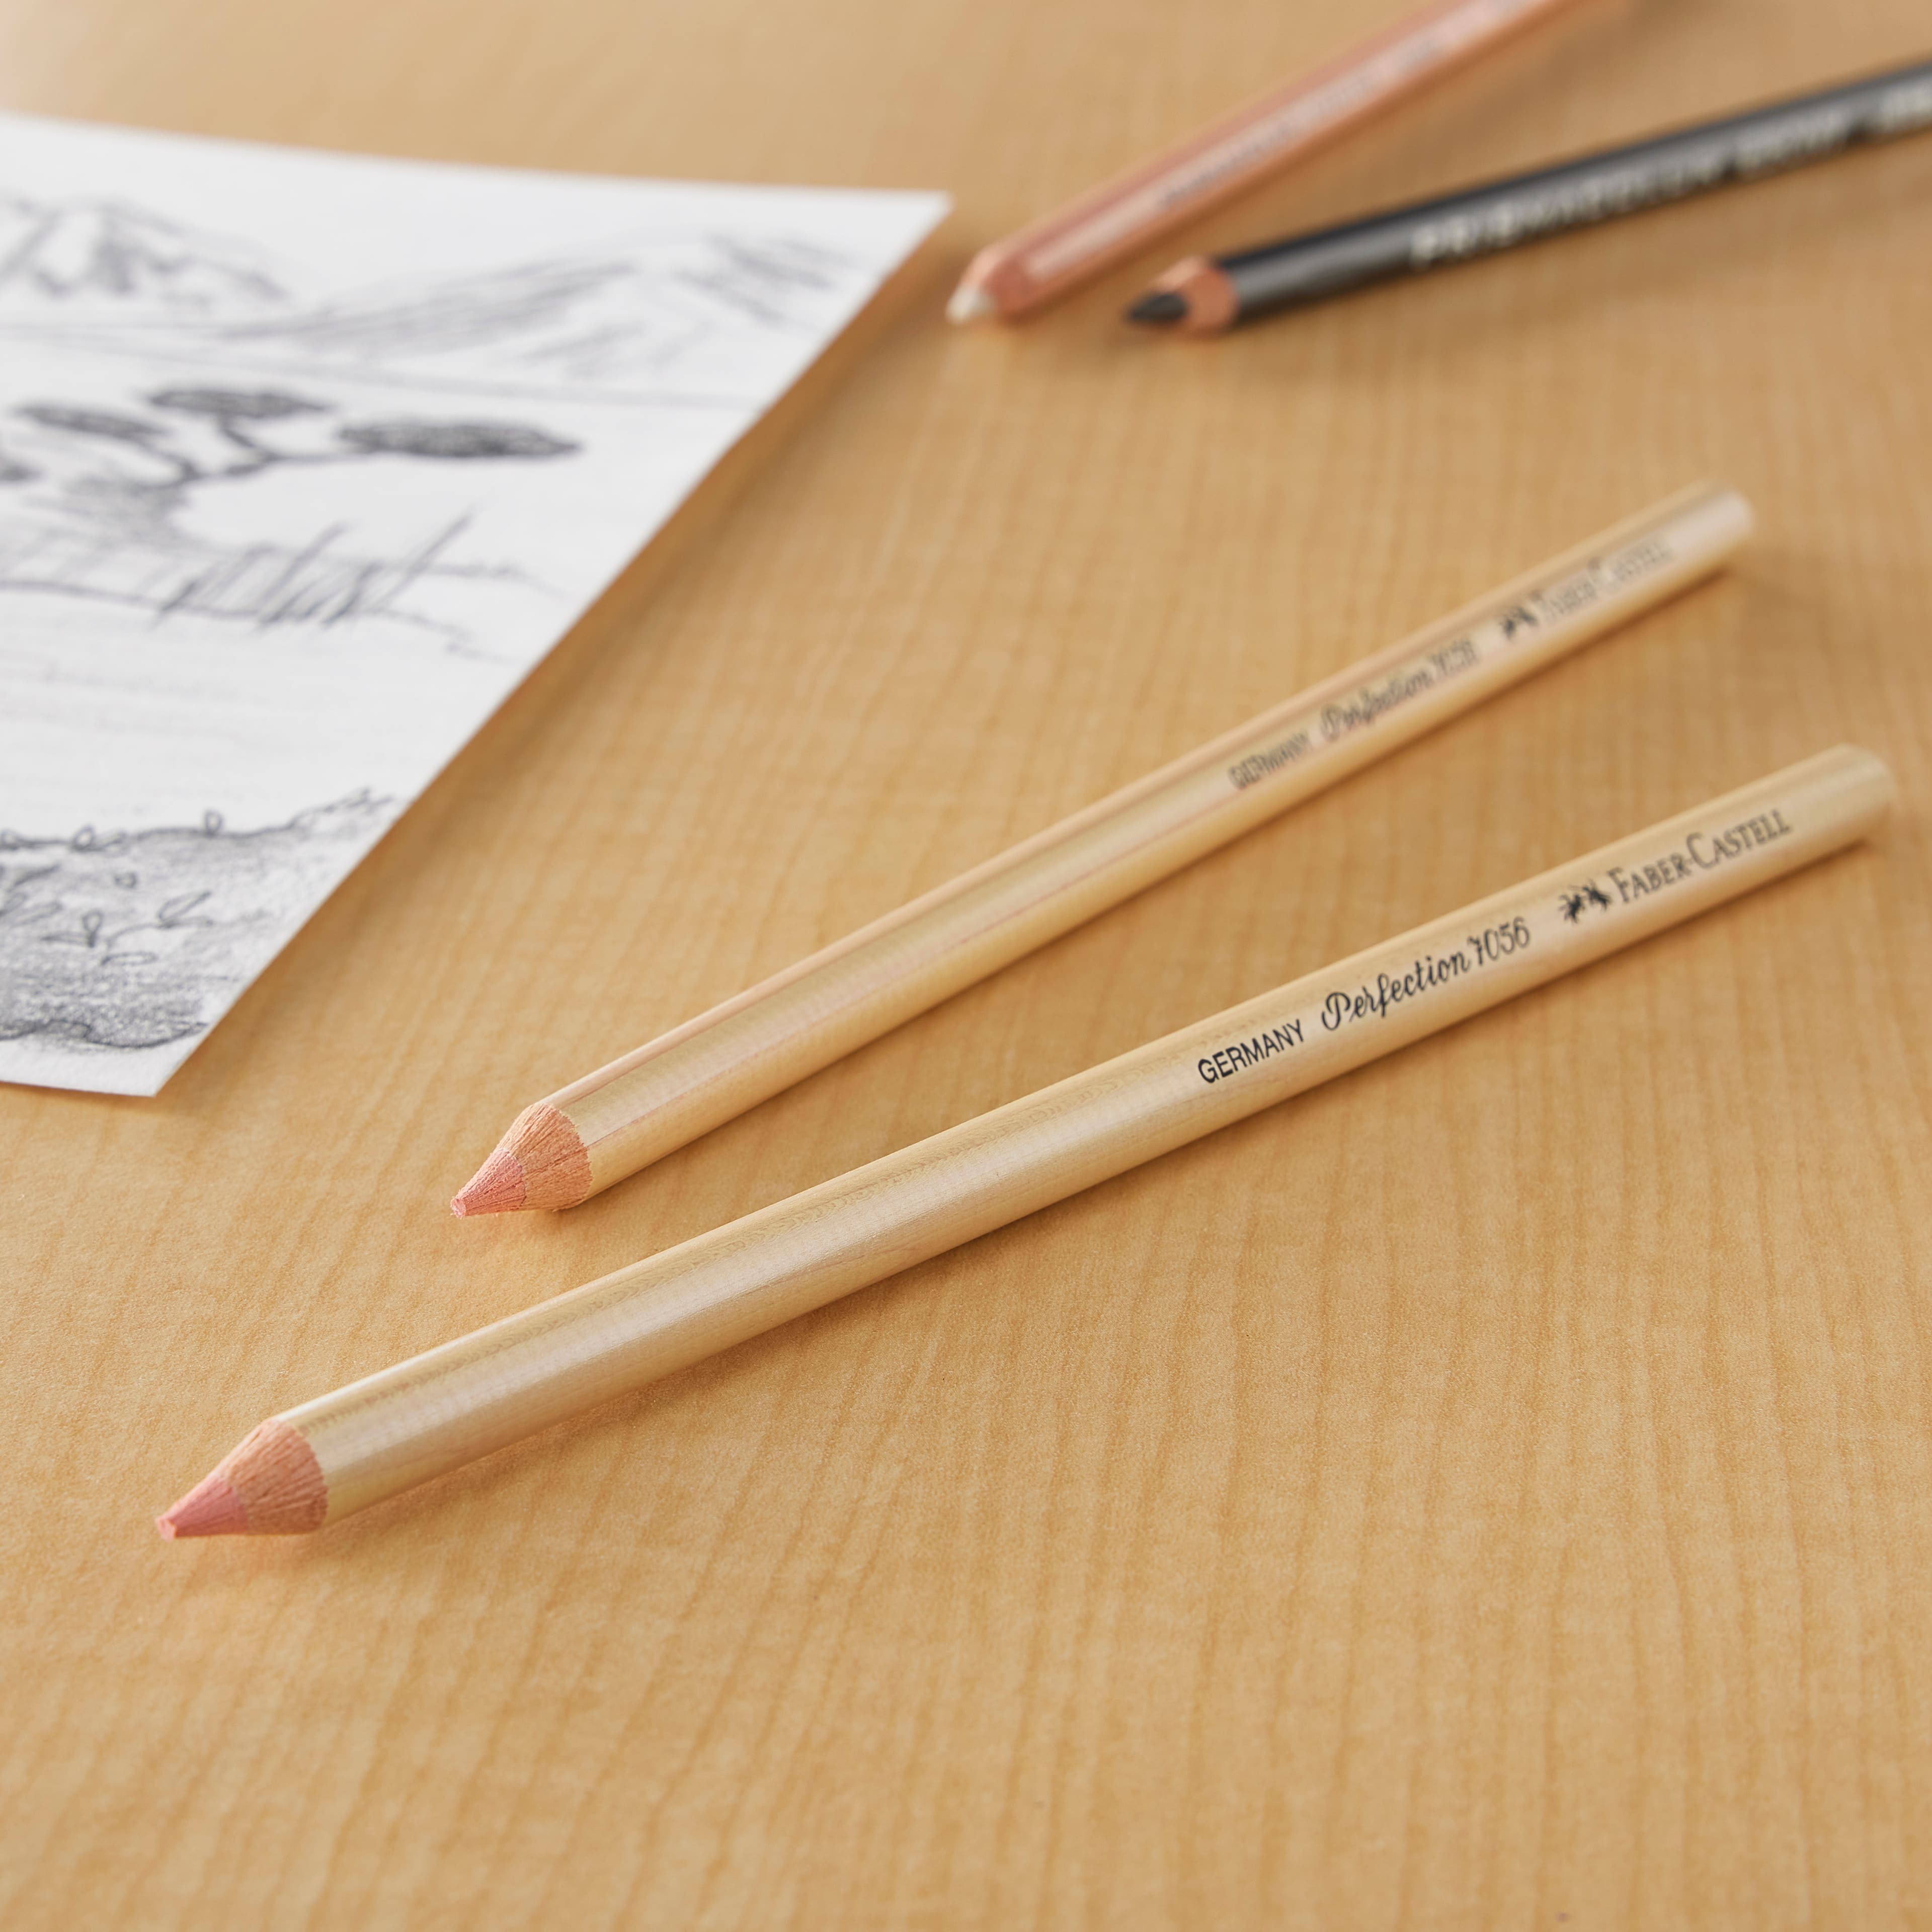 Find the Faber-Castell® Kneaded Erasers at Michaels